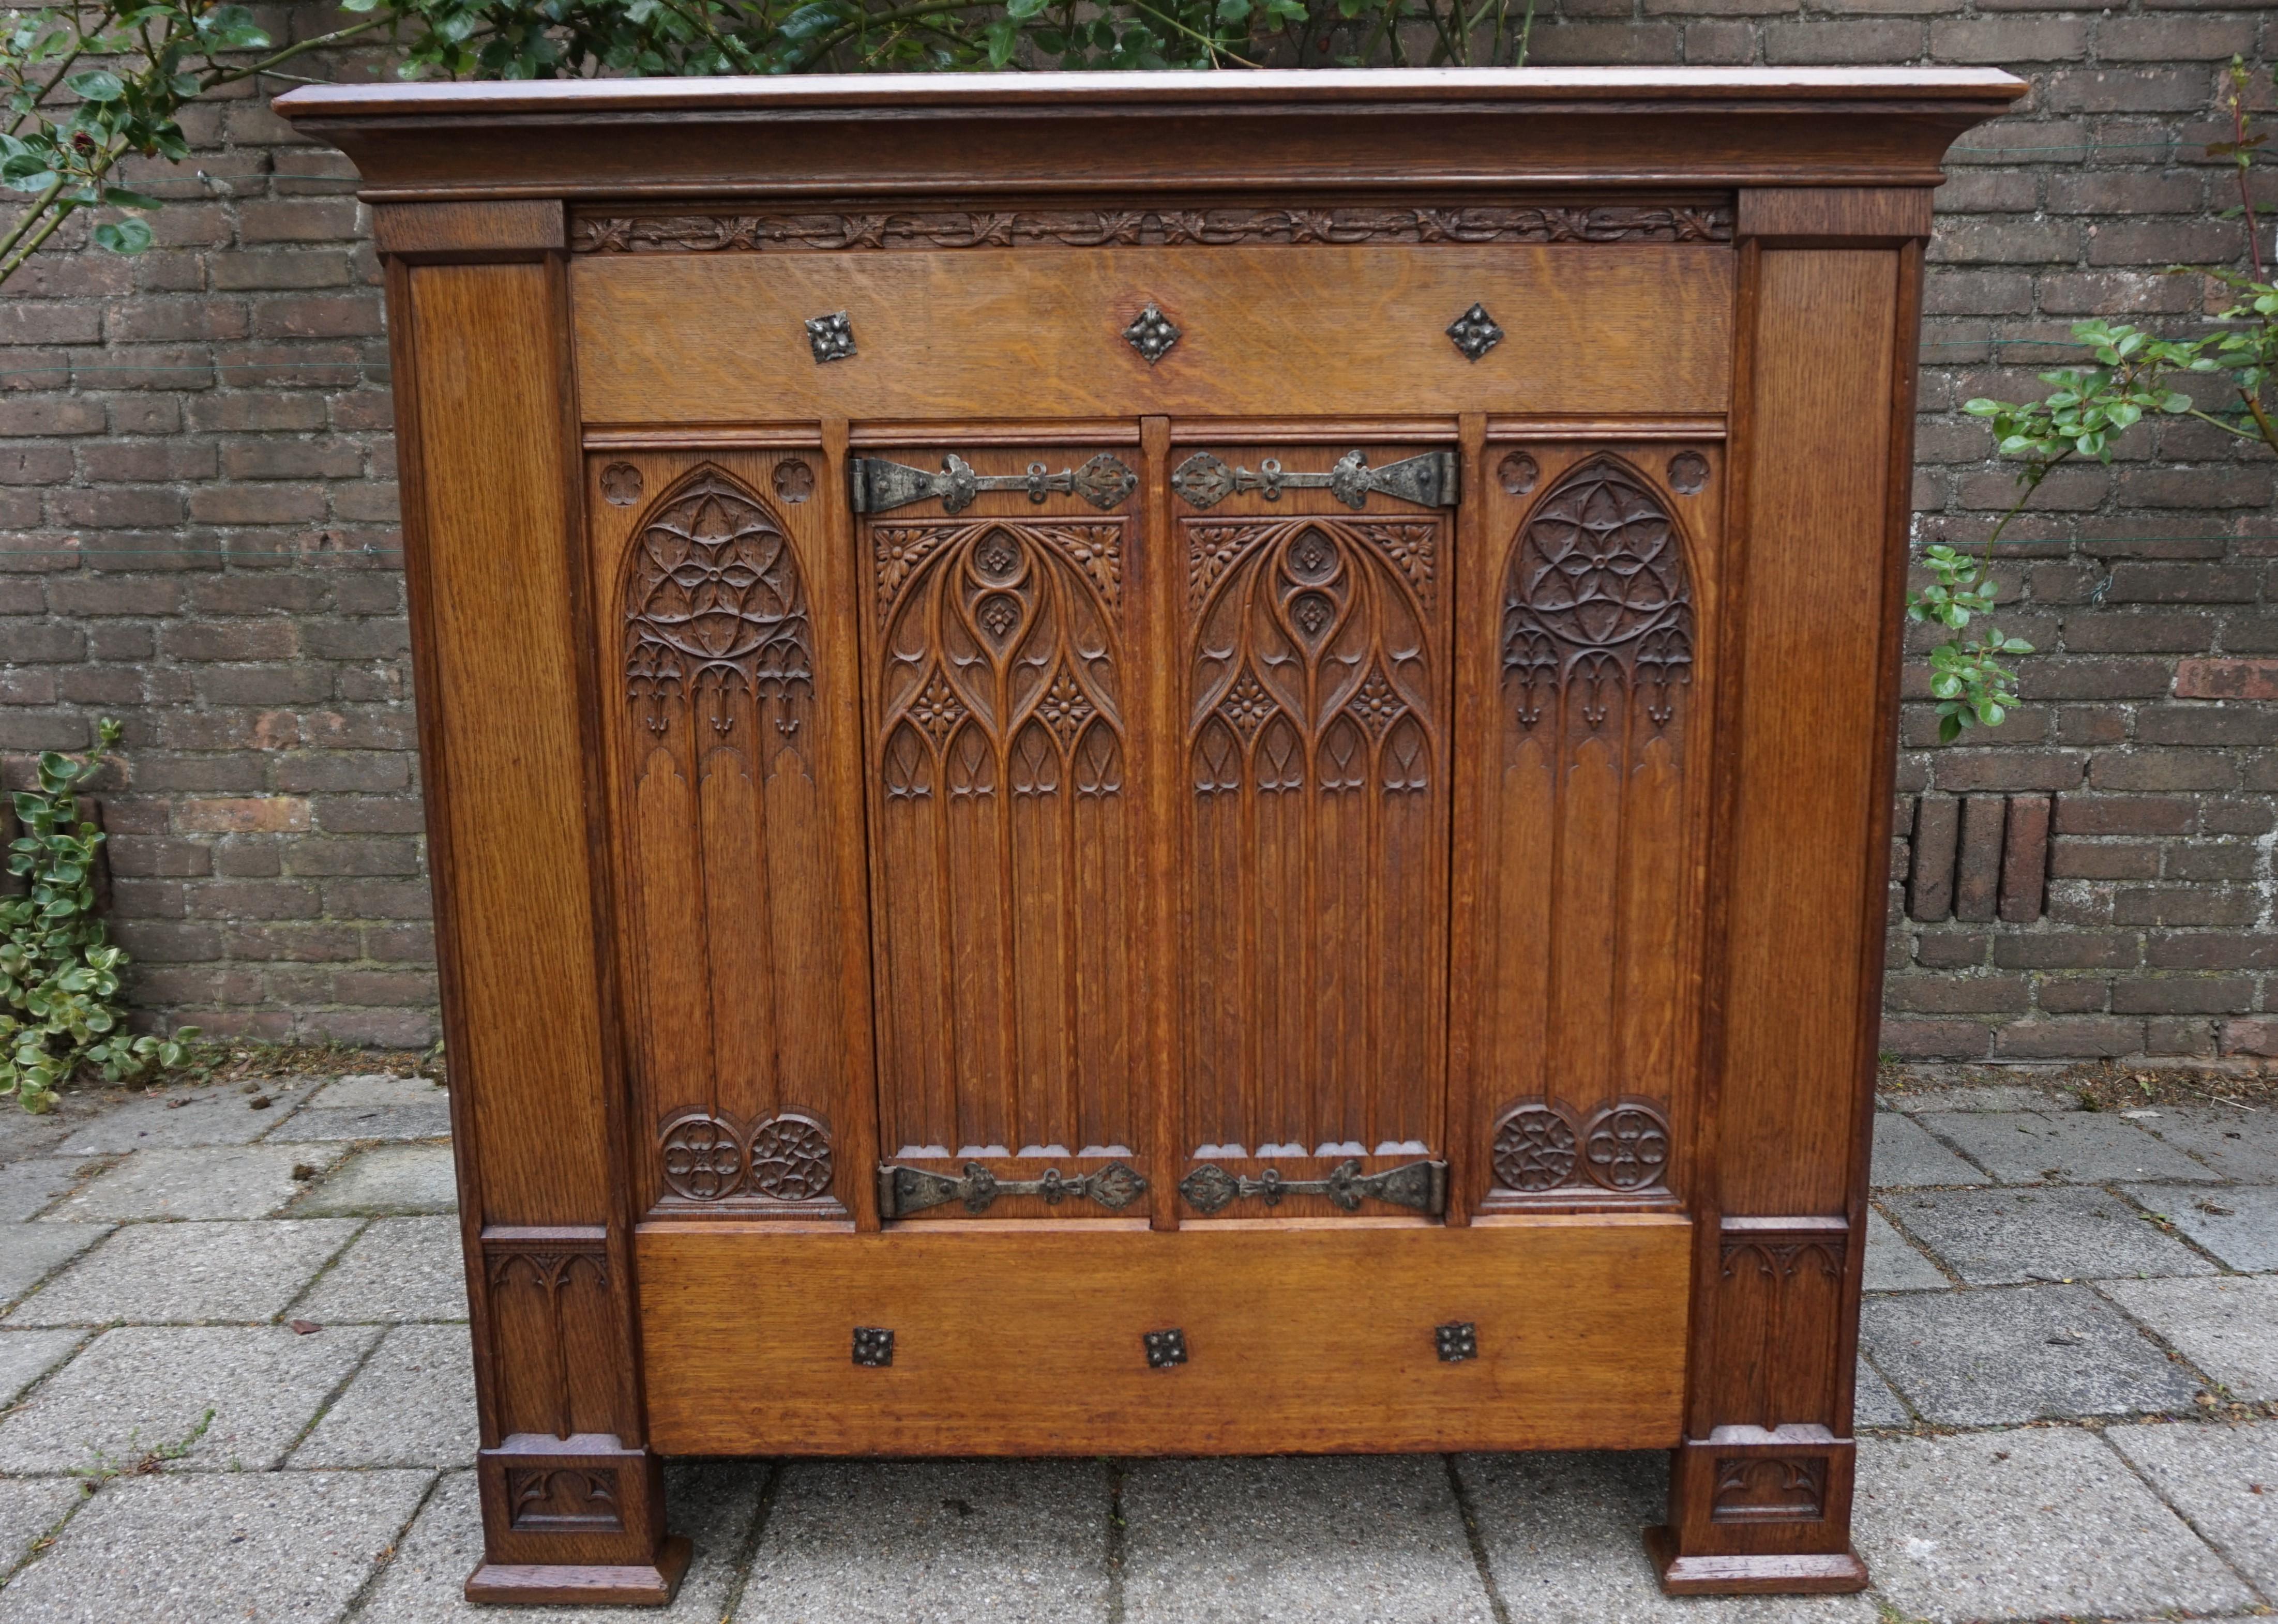 19th Century Antique Gothic Revival Credenza Sideboard Cabinet W. Hand Carved Church Windows